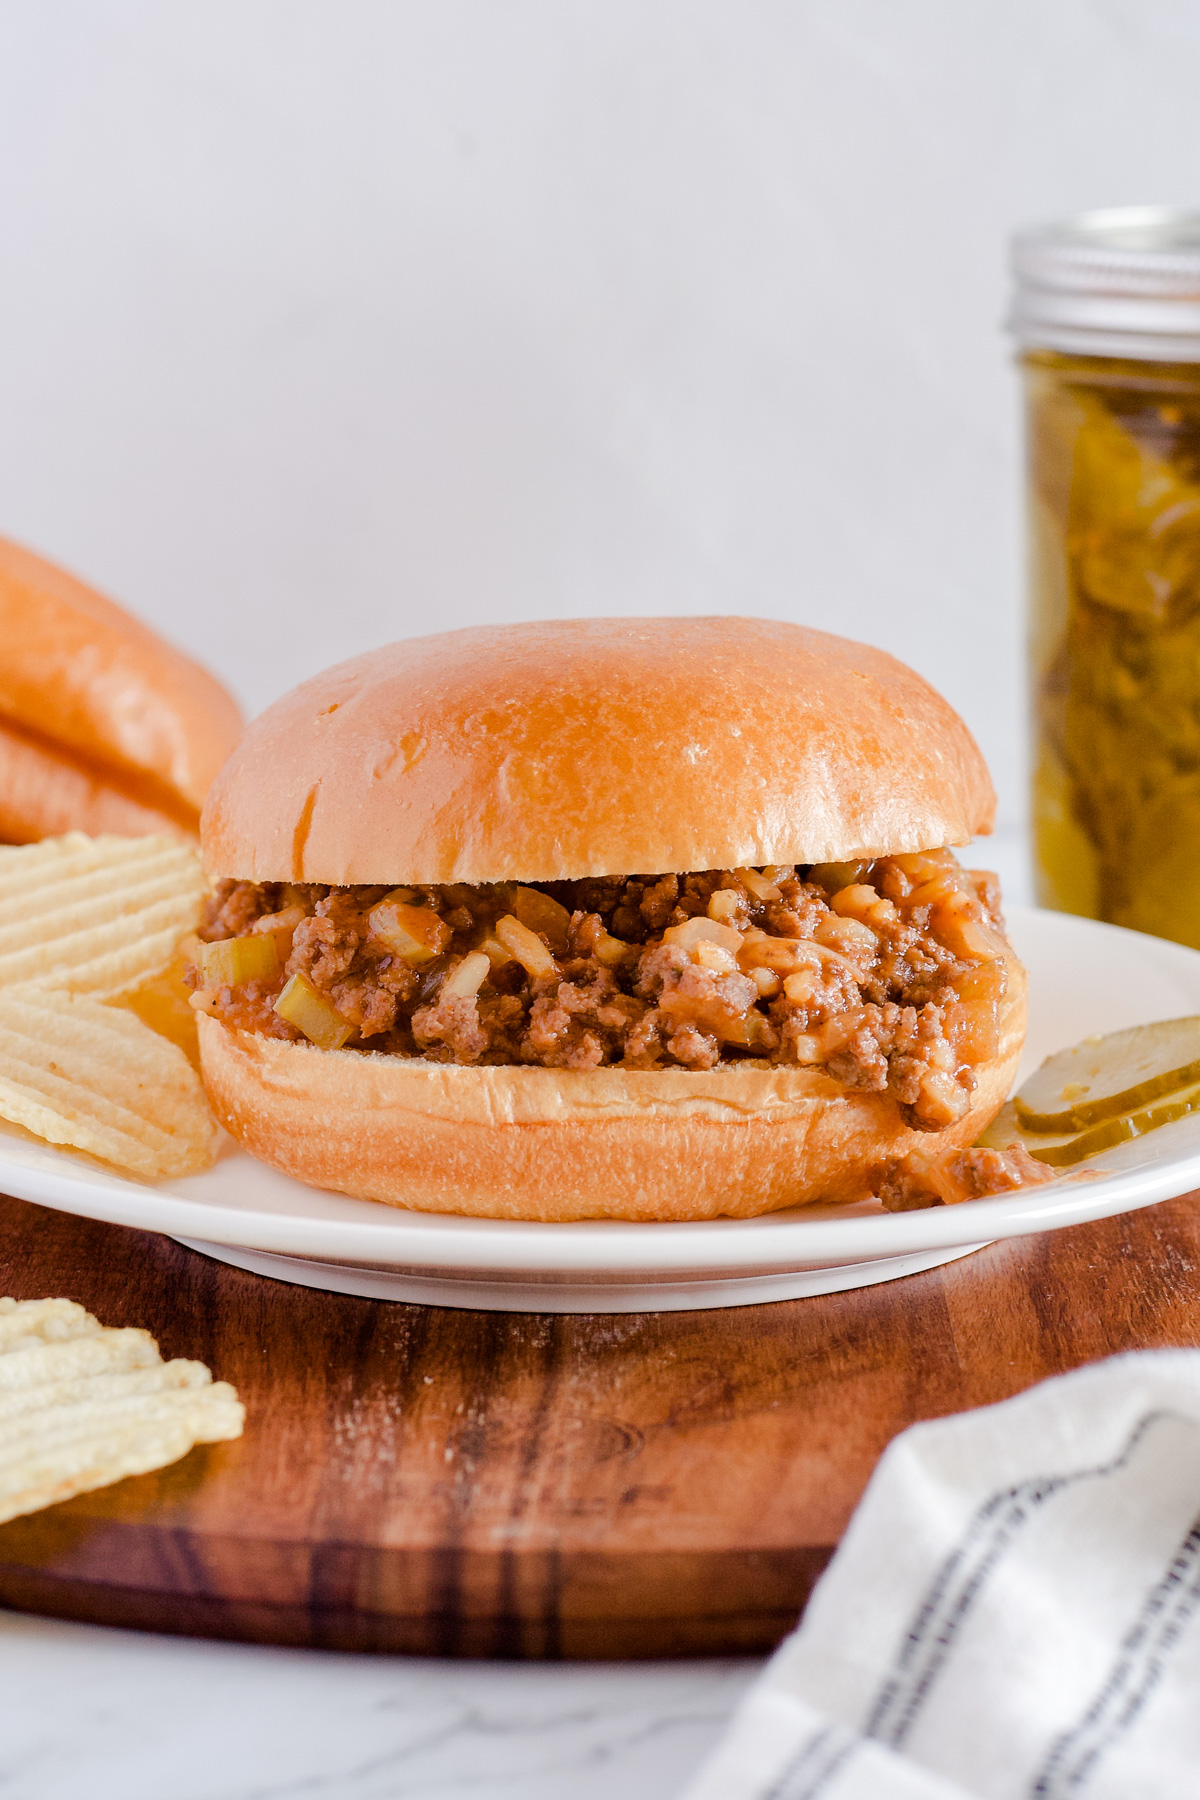 Sloppy Joe served with chips and pickles on a white plate